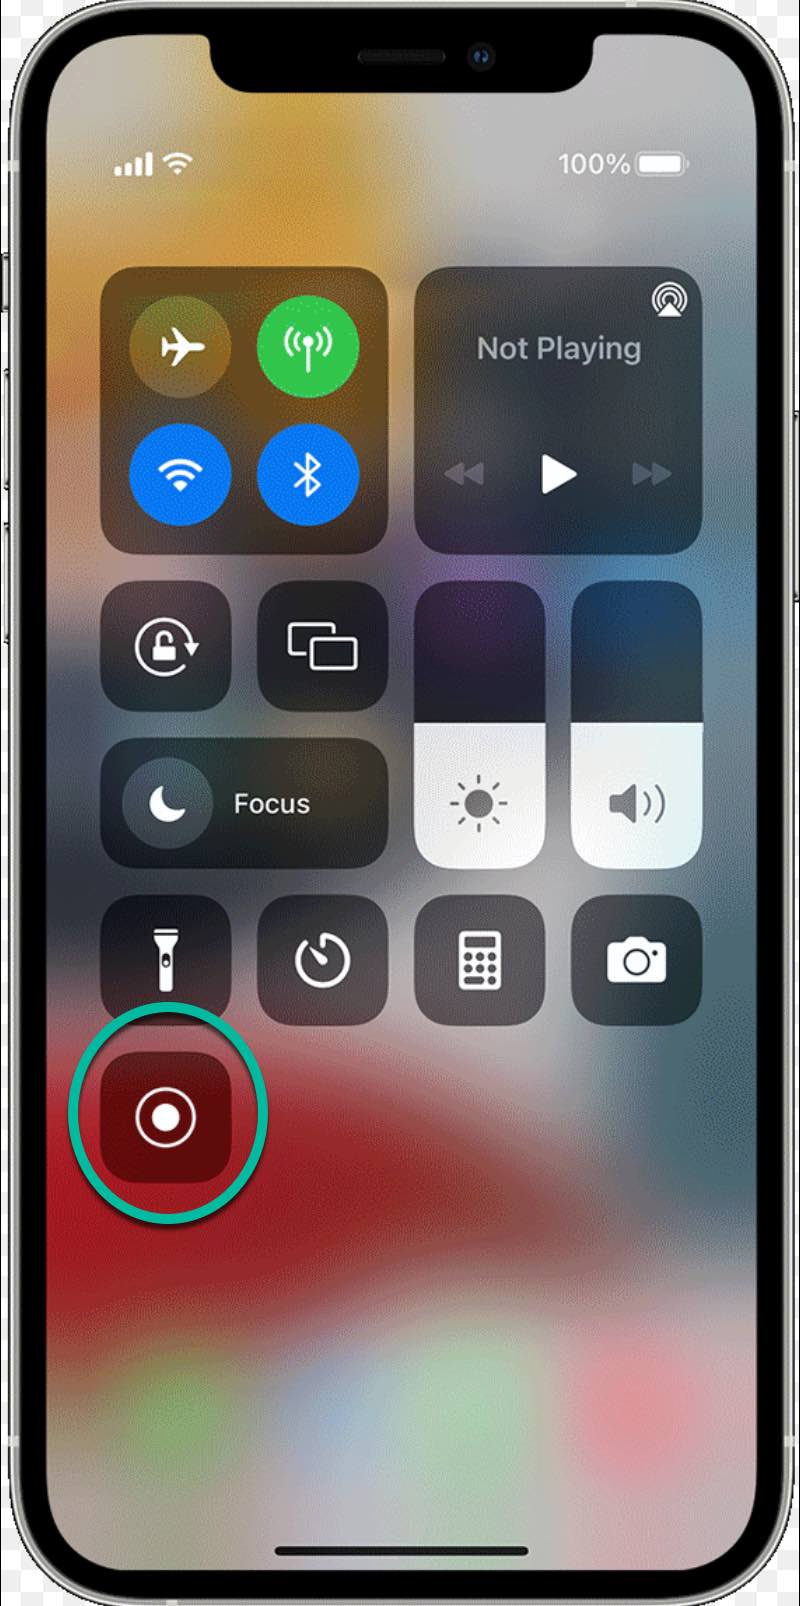 screen recorder button to download video reels